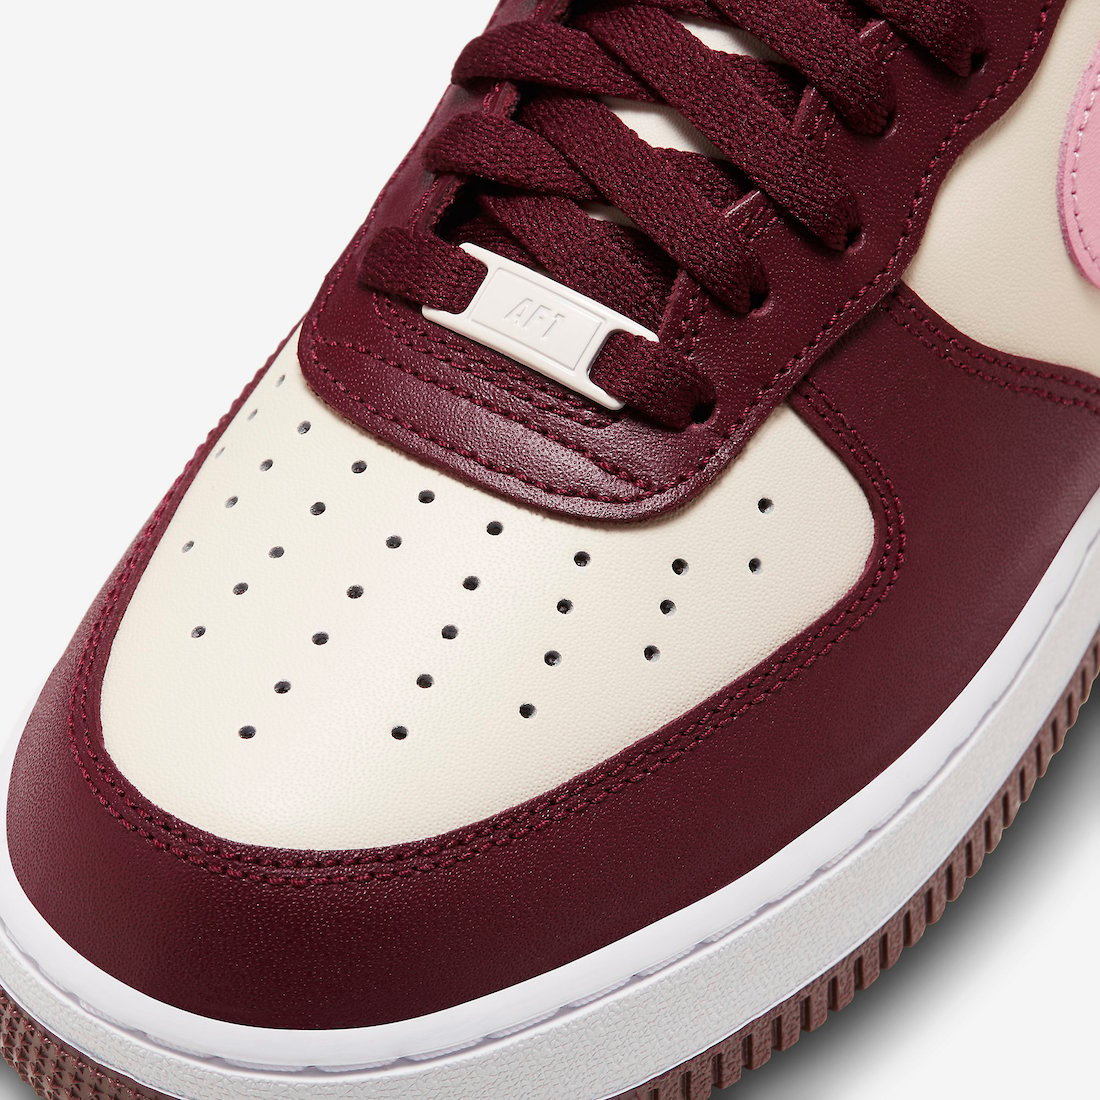 Nike Air Force 1 Low Valentines Day Sail Night Maroon Medium Soft Pink Release Date Info